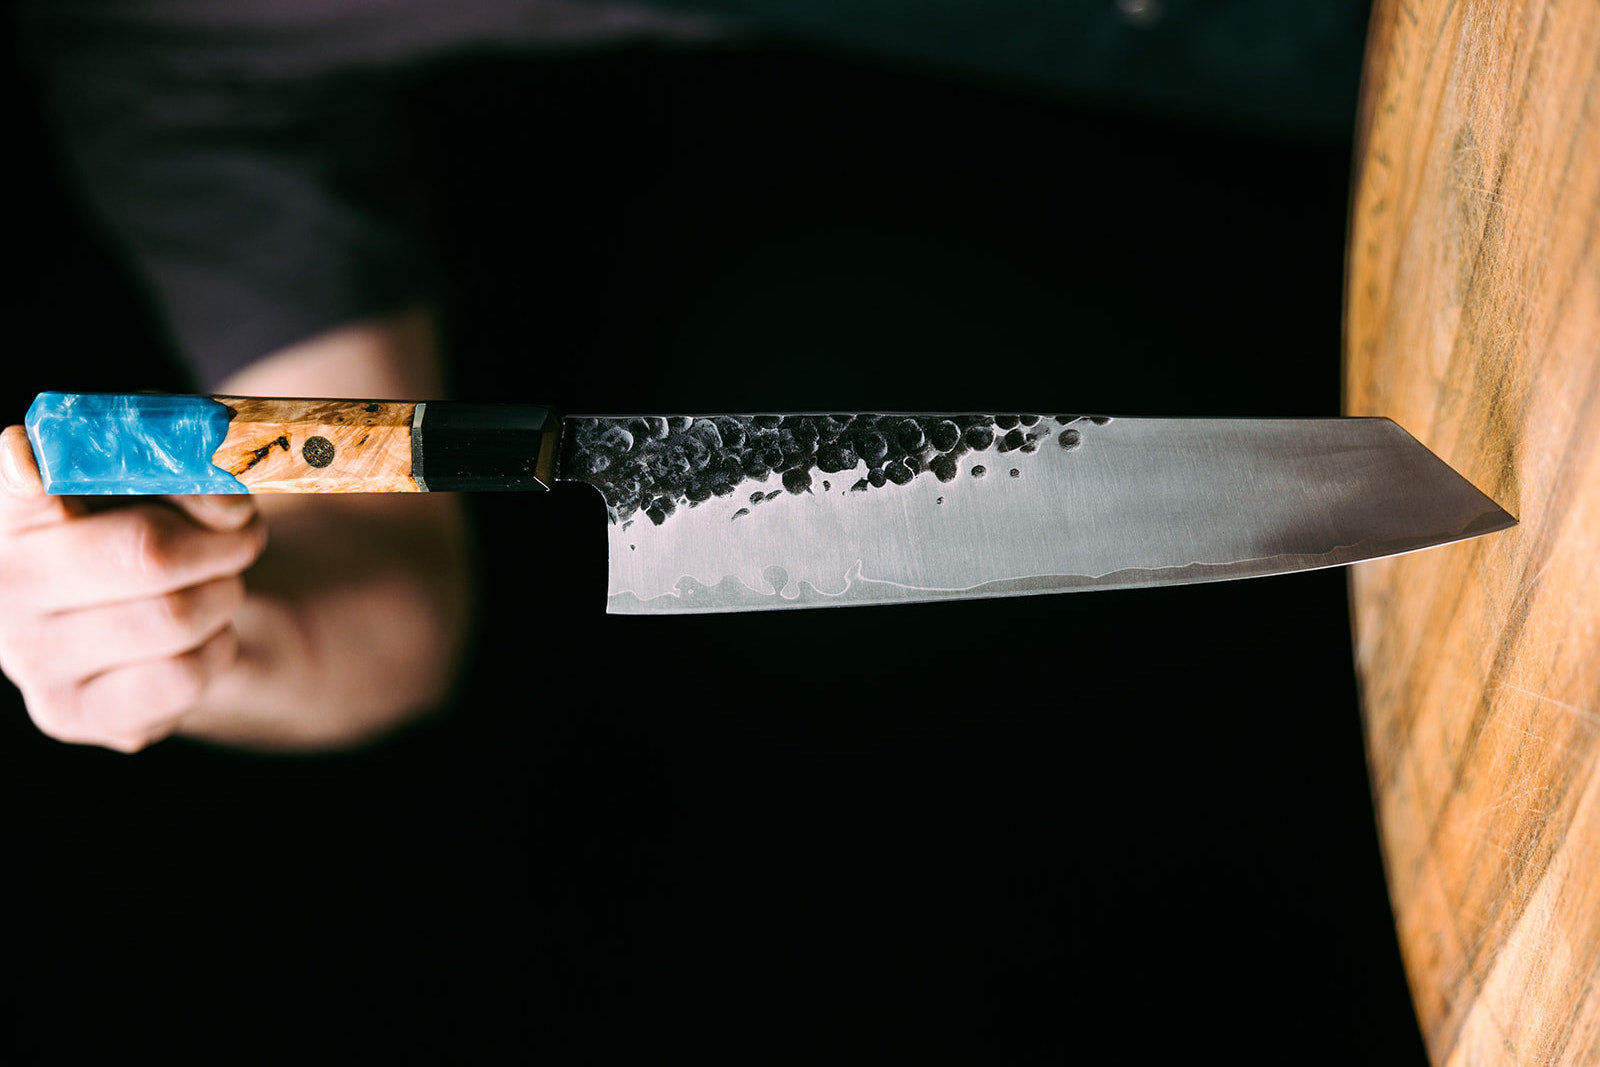 A Guide to Japanese Knives and Why They Are the Best